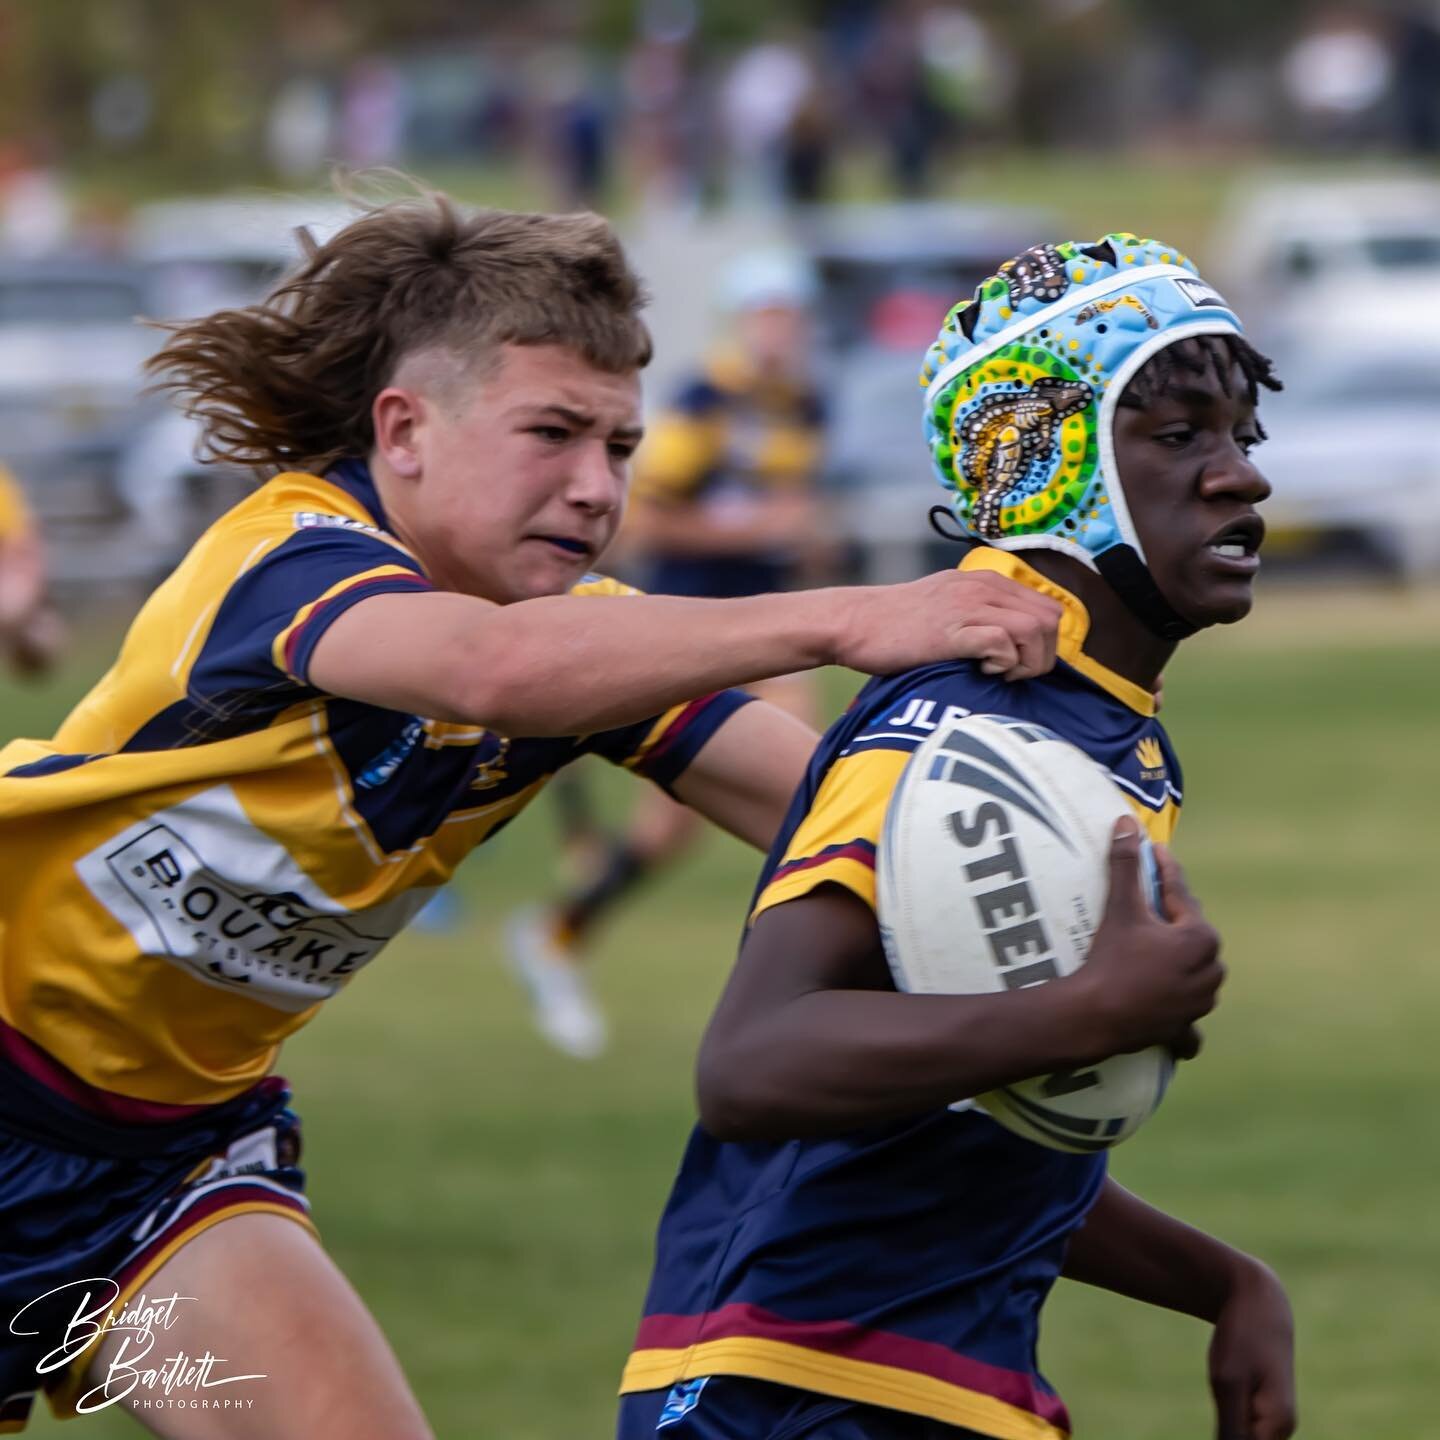 Rivalry on the field, brotherhood off the pitch. 🏉💪 Last Saturday, the U13s St Johns JRLFC Blue and Gold clashed in an epic showdown! ⚔️🔵🟡 It was a battle of determination, where the boys gave their all and played their hearts out. 🙌🔥 Win or lo